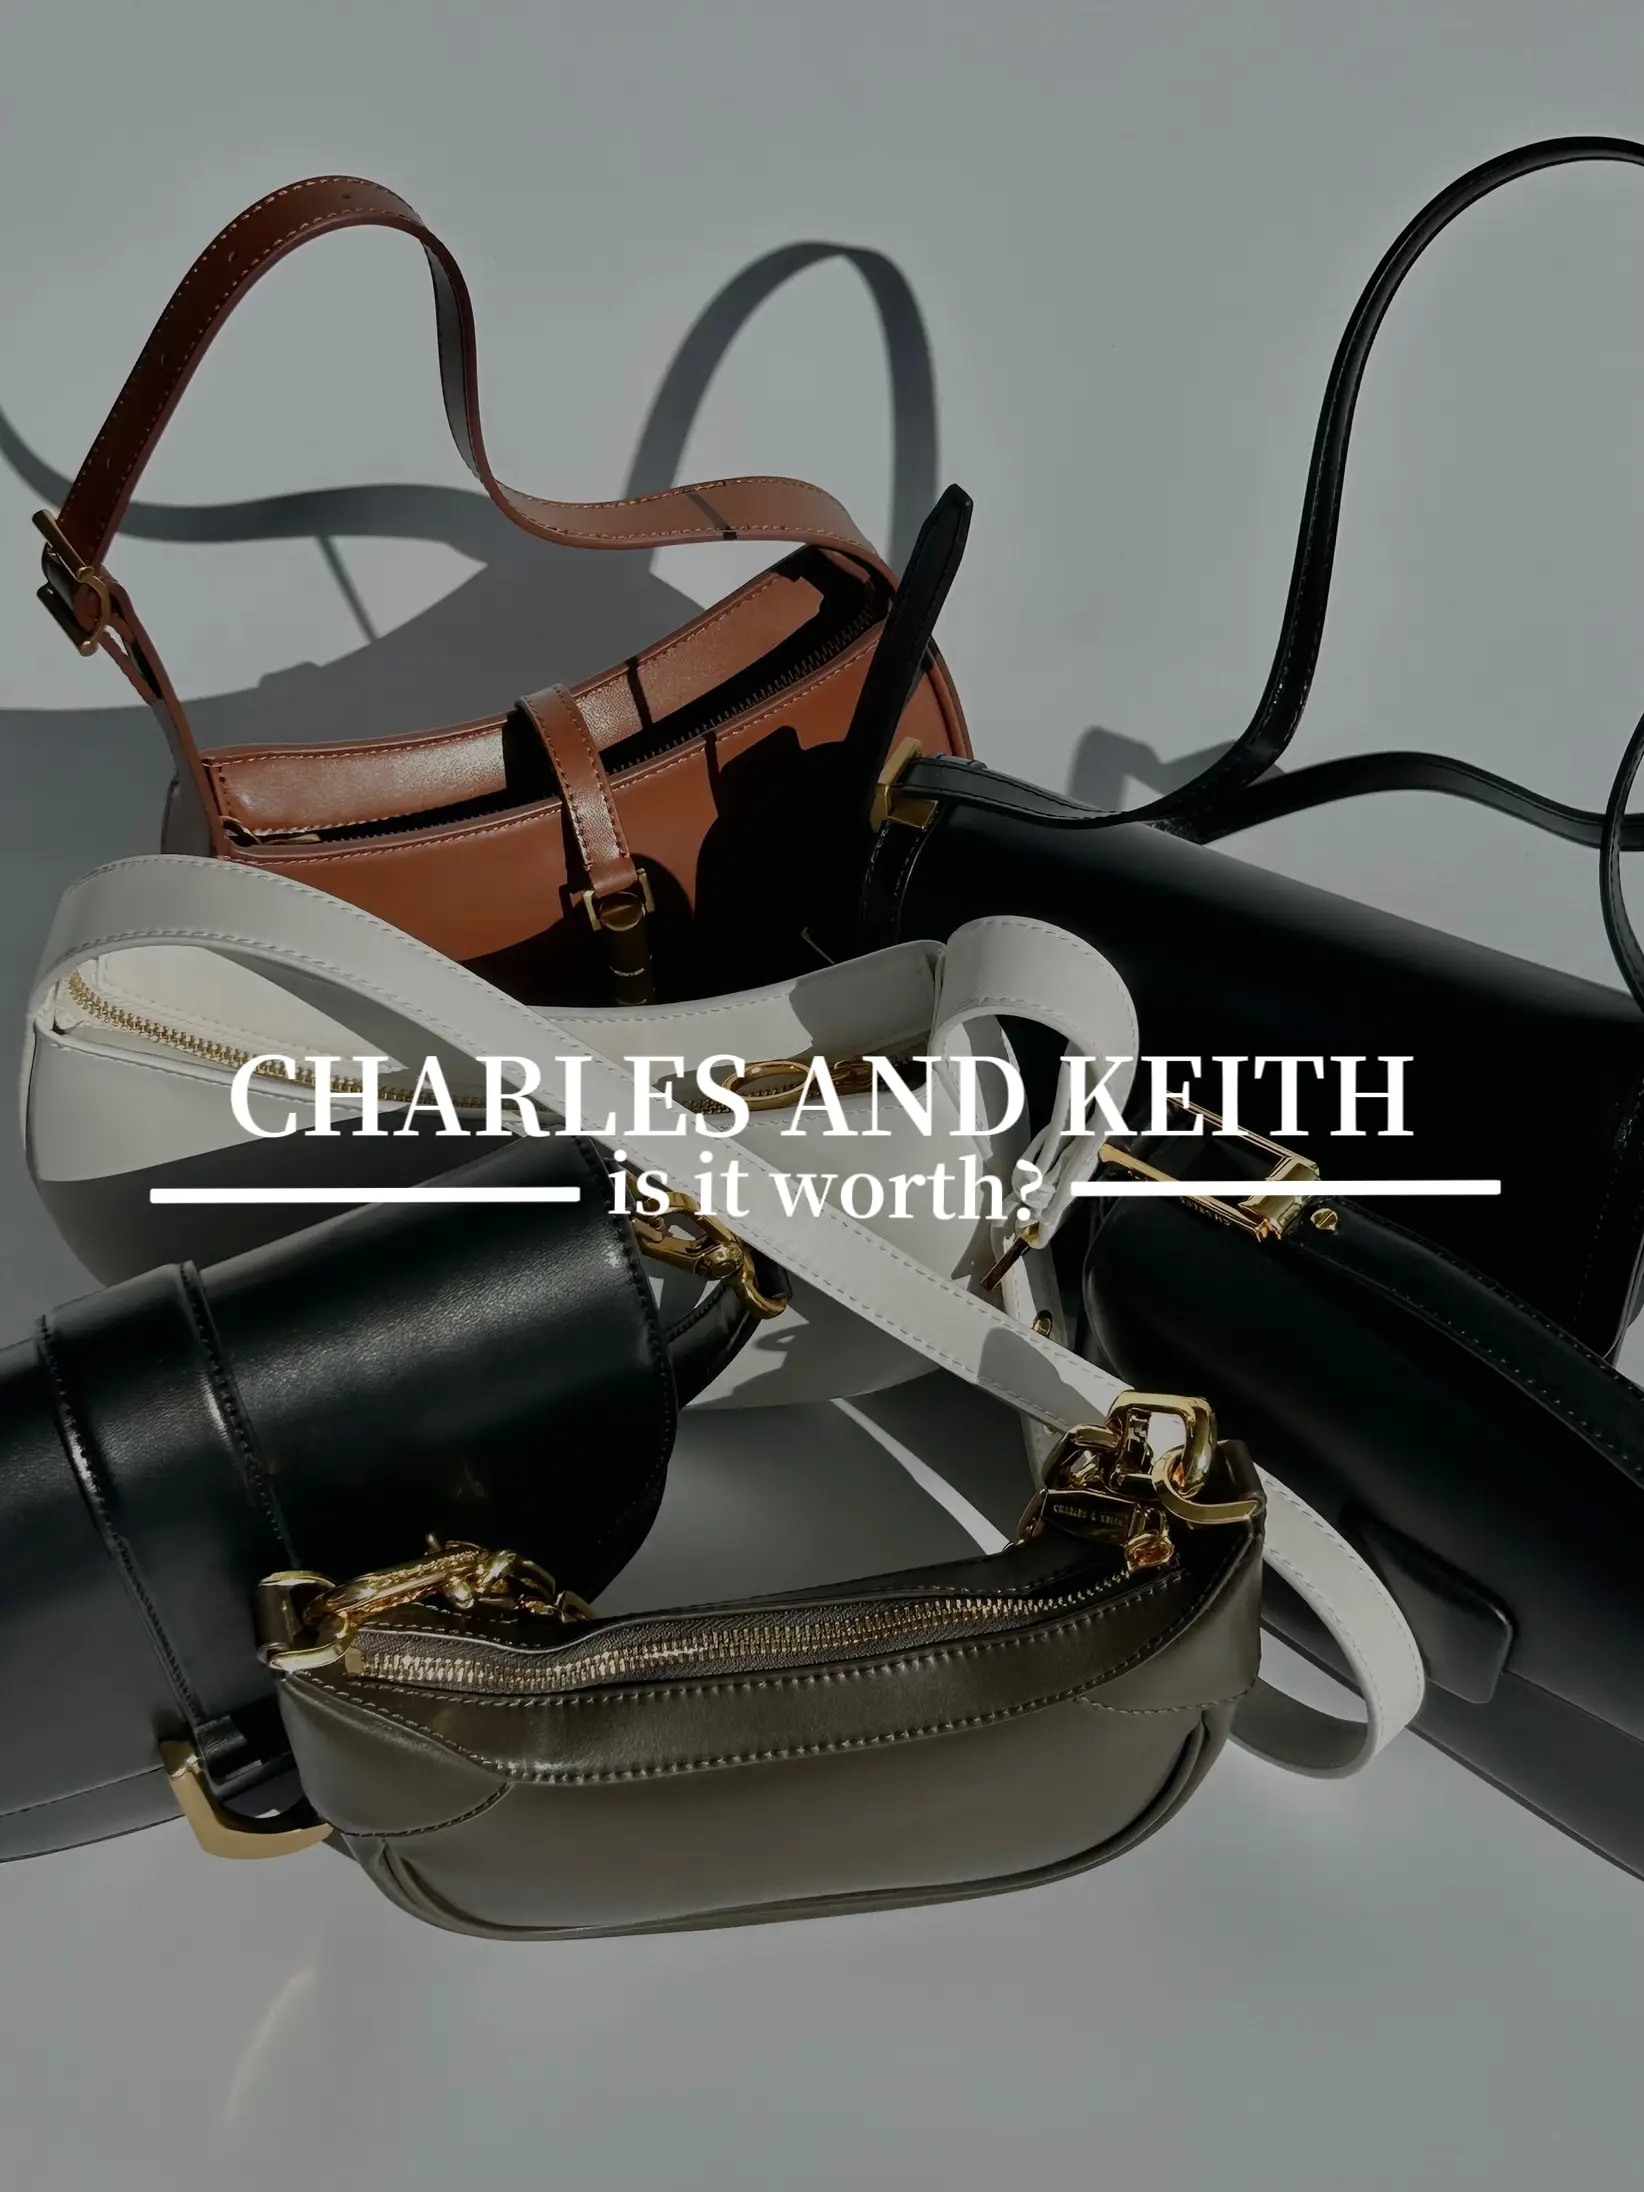 Is CHARLES & KEITH worth it?'s images